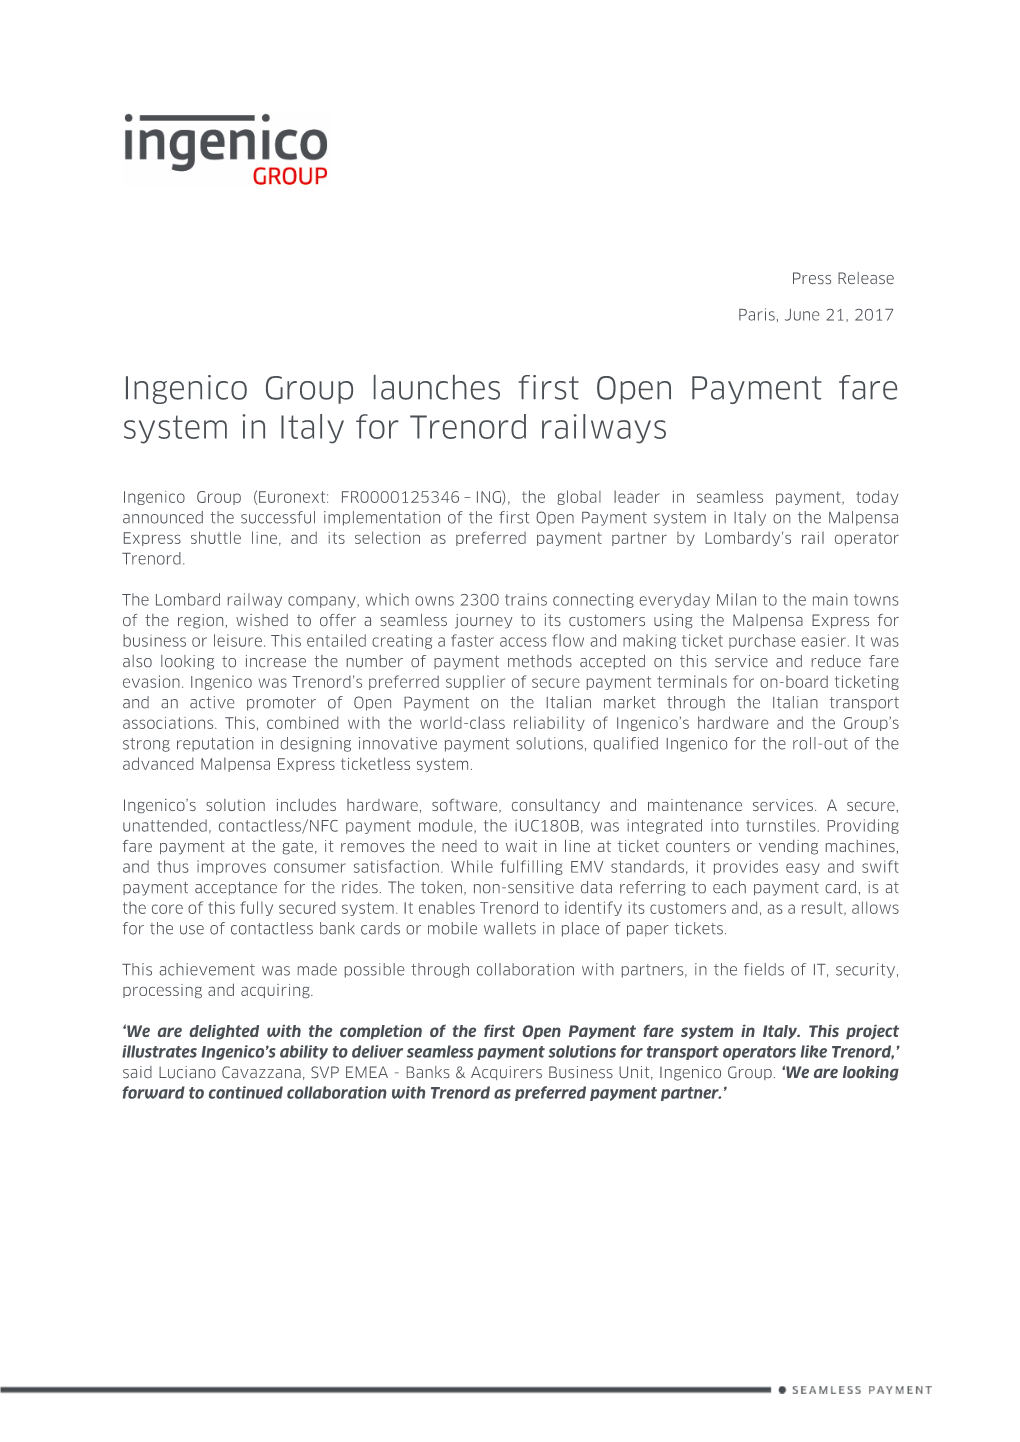 Ingenico Group Launches First Open Payment Fare System in Italy for Trenord Railways